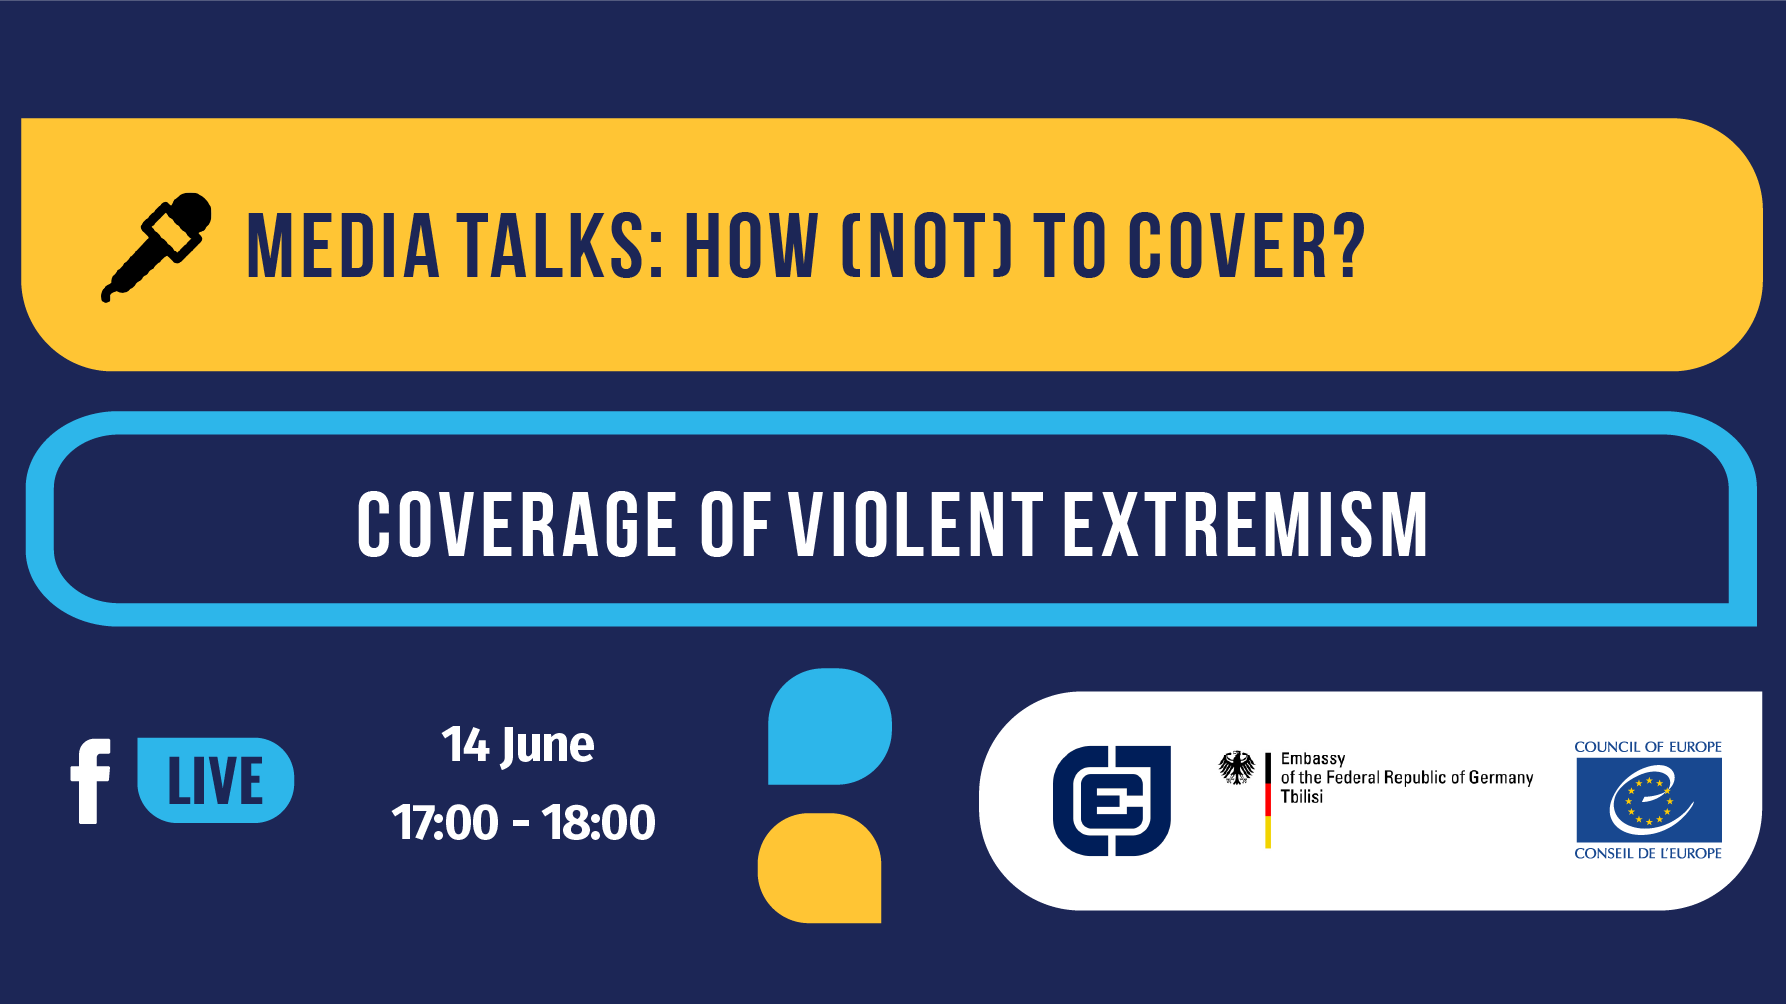 Media Talks: How (not) to cover? Come back with the topic on extremism